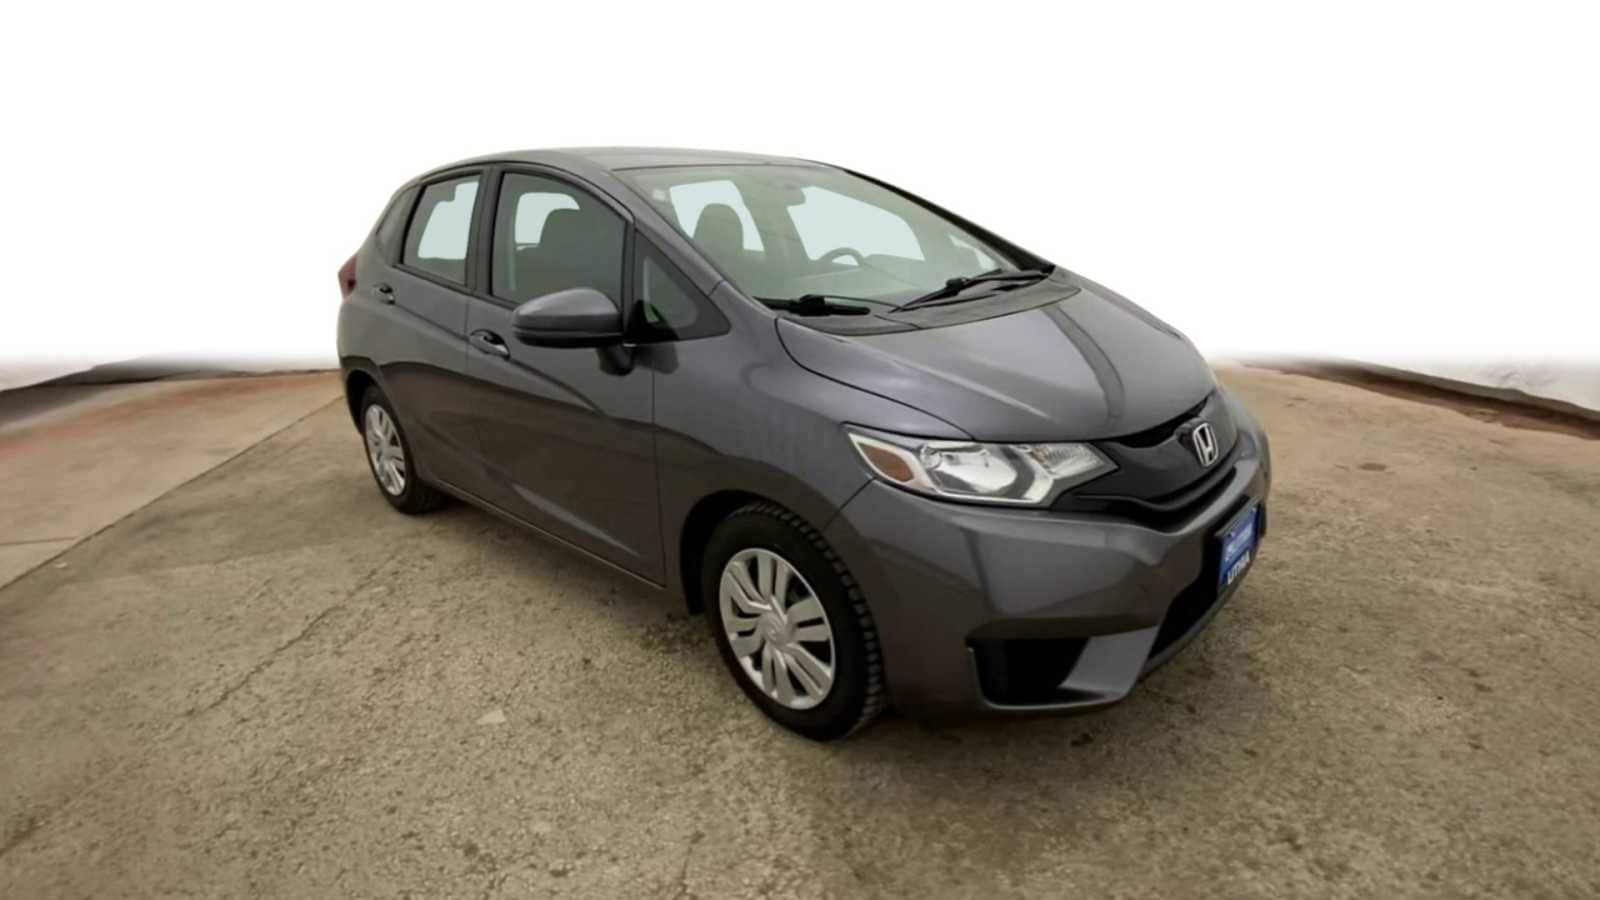 Used 2015 Honda Fit LX with VIN 3HGGK5G5XFM784833 for sale in Great Falls, MT